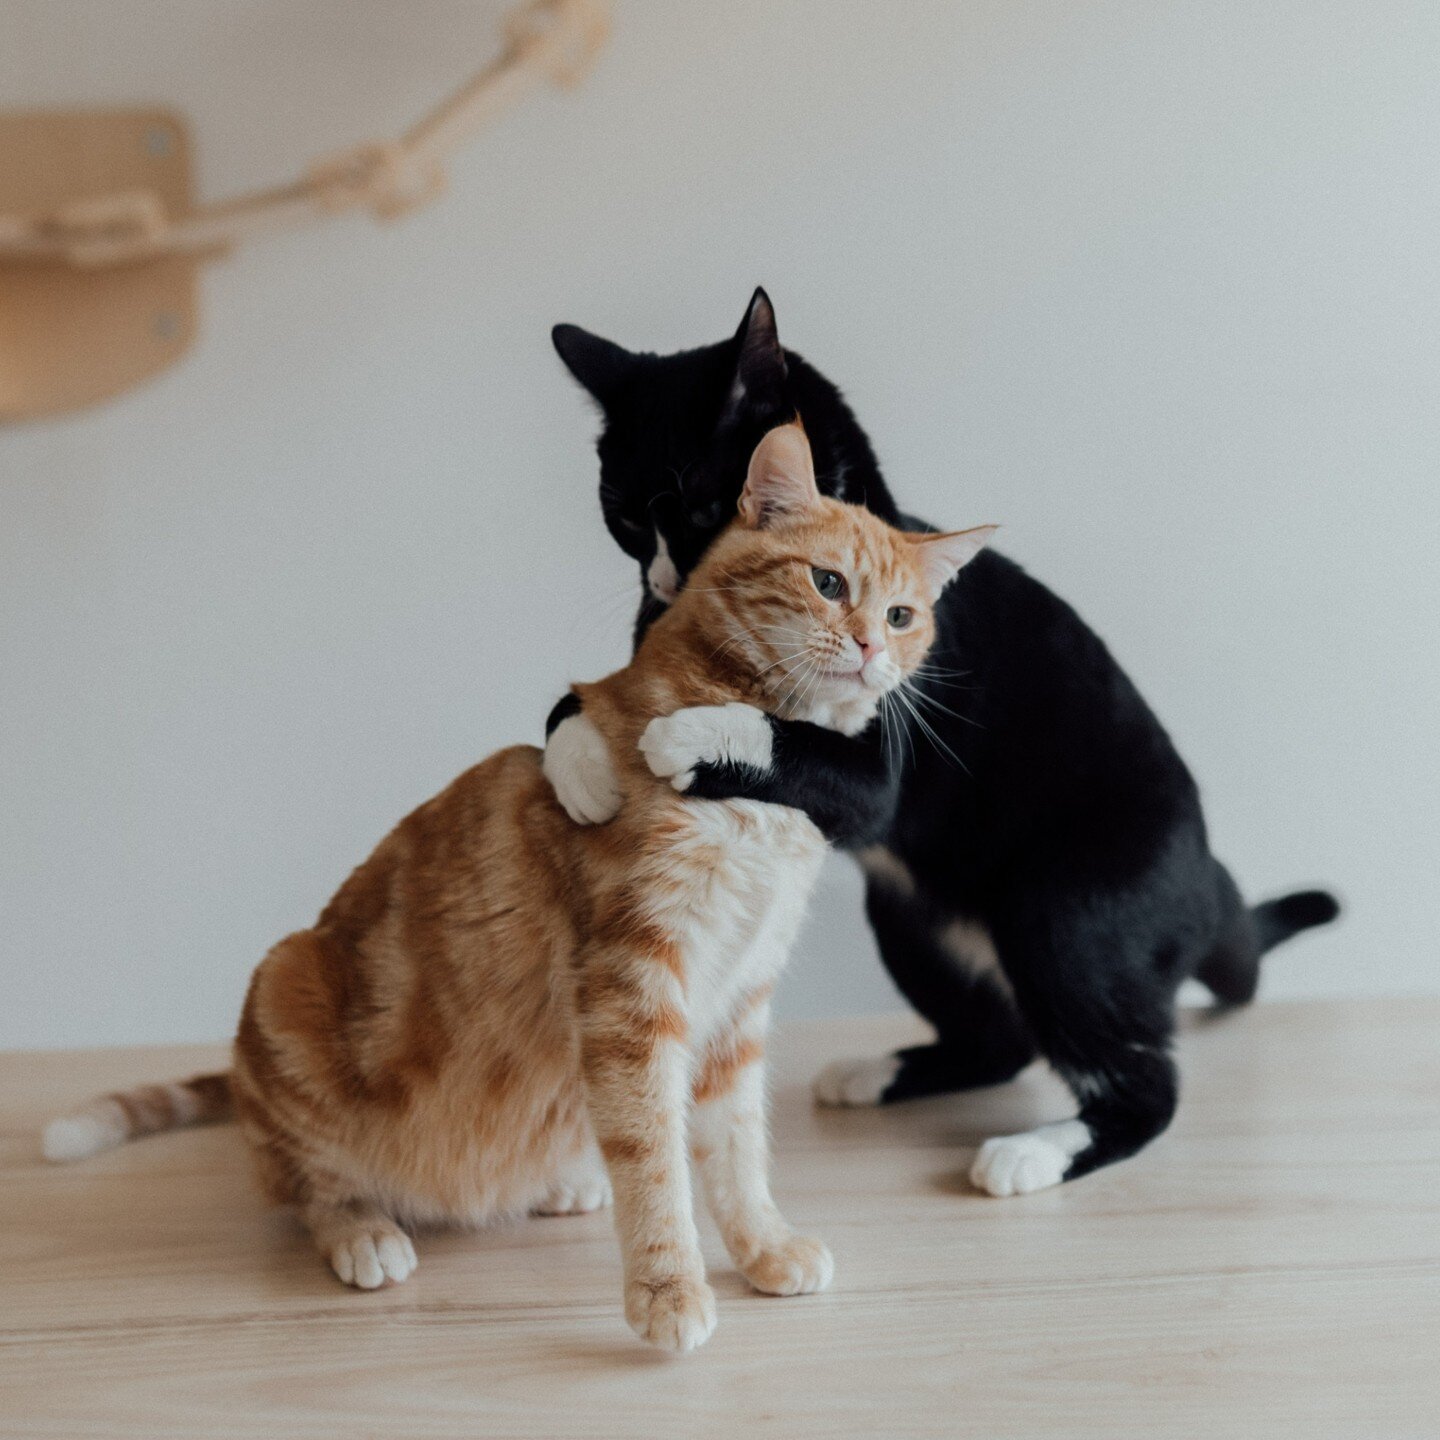 Truly the cat's meow. From pet food to veterinary care, our #BrodskyNeighbors program means plenty of perks for our furry residents as well. Tap our Link in Bio for a full list of discounts and privileges for pets.